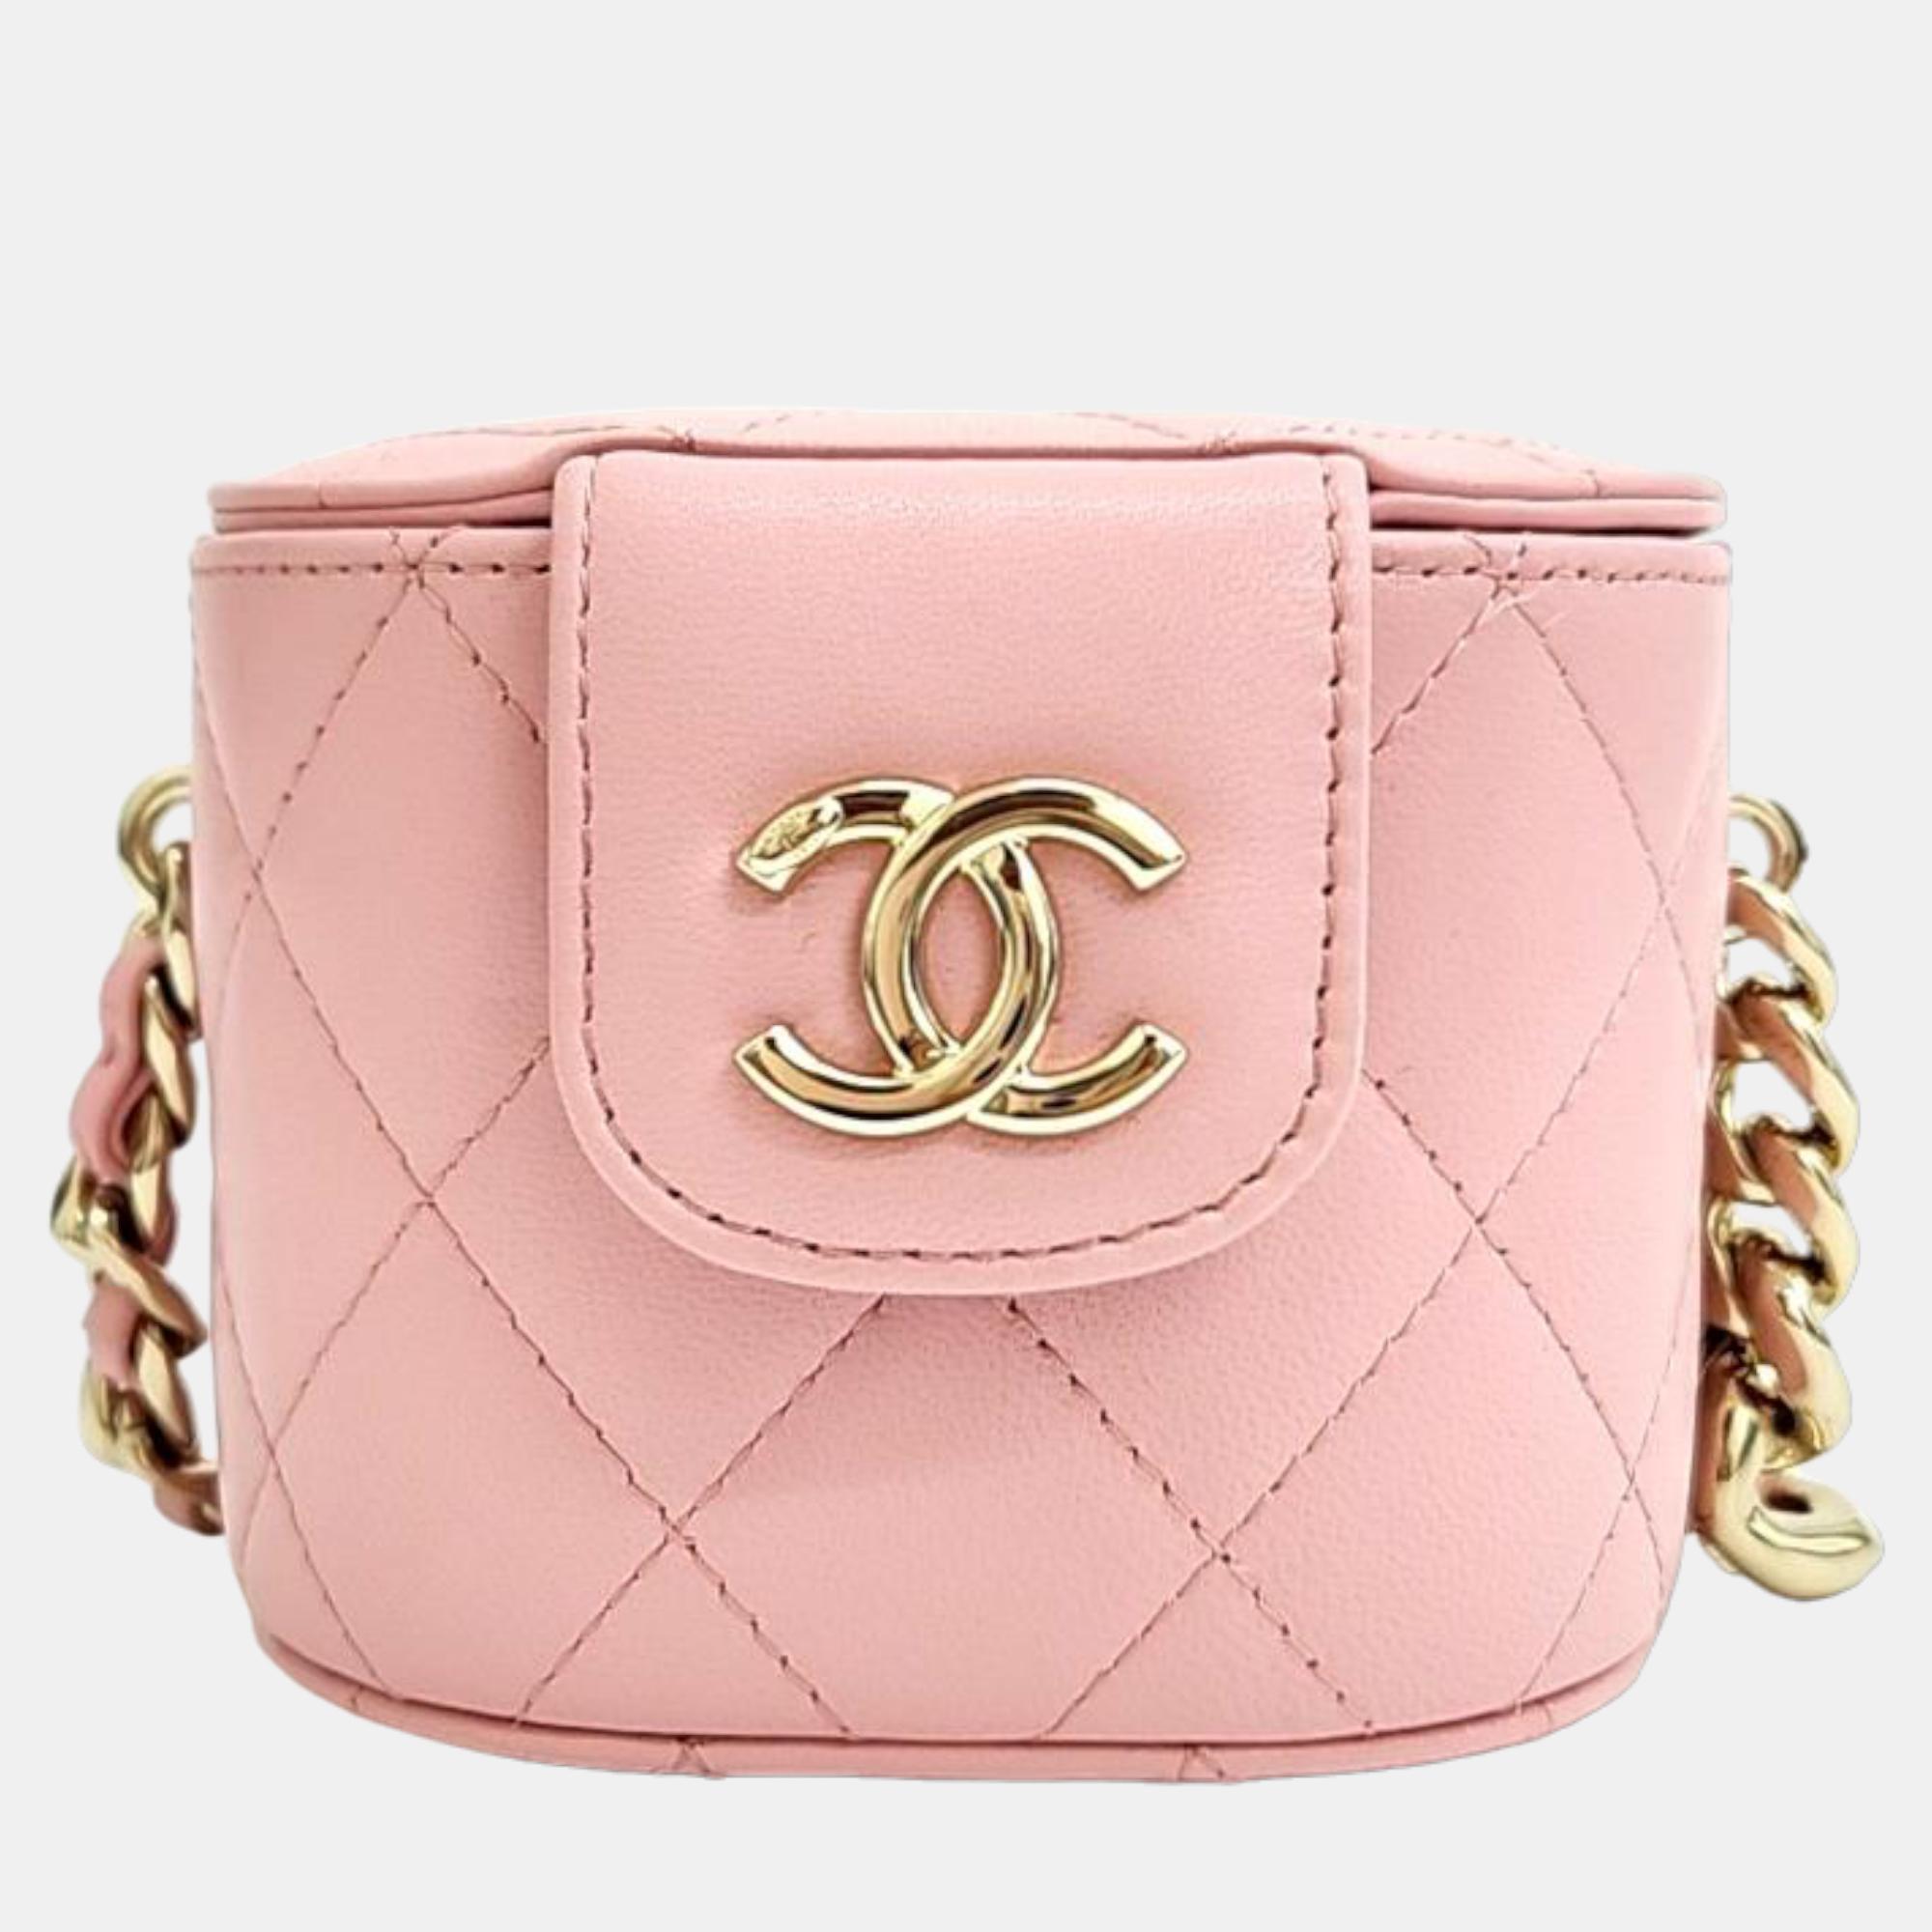 Pre-owned Chanel Pink Leather Mini Vanity Case Clutch Bag